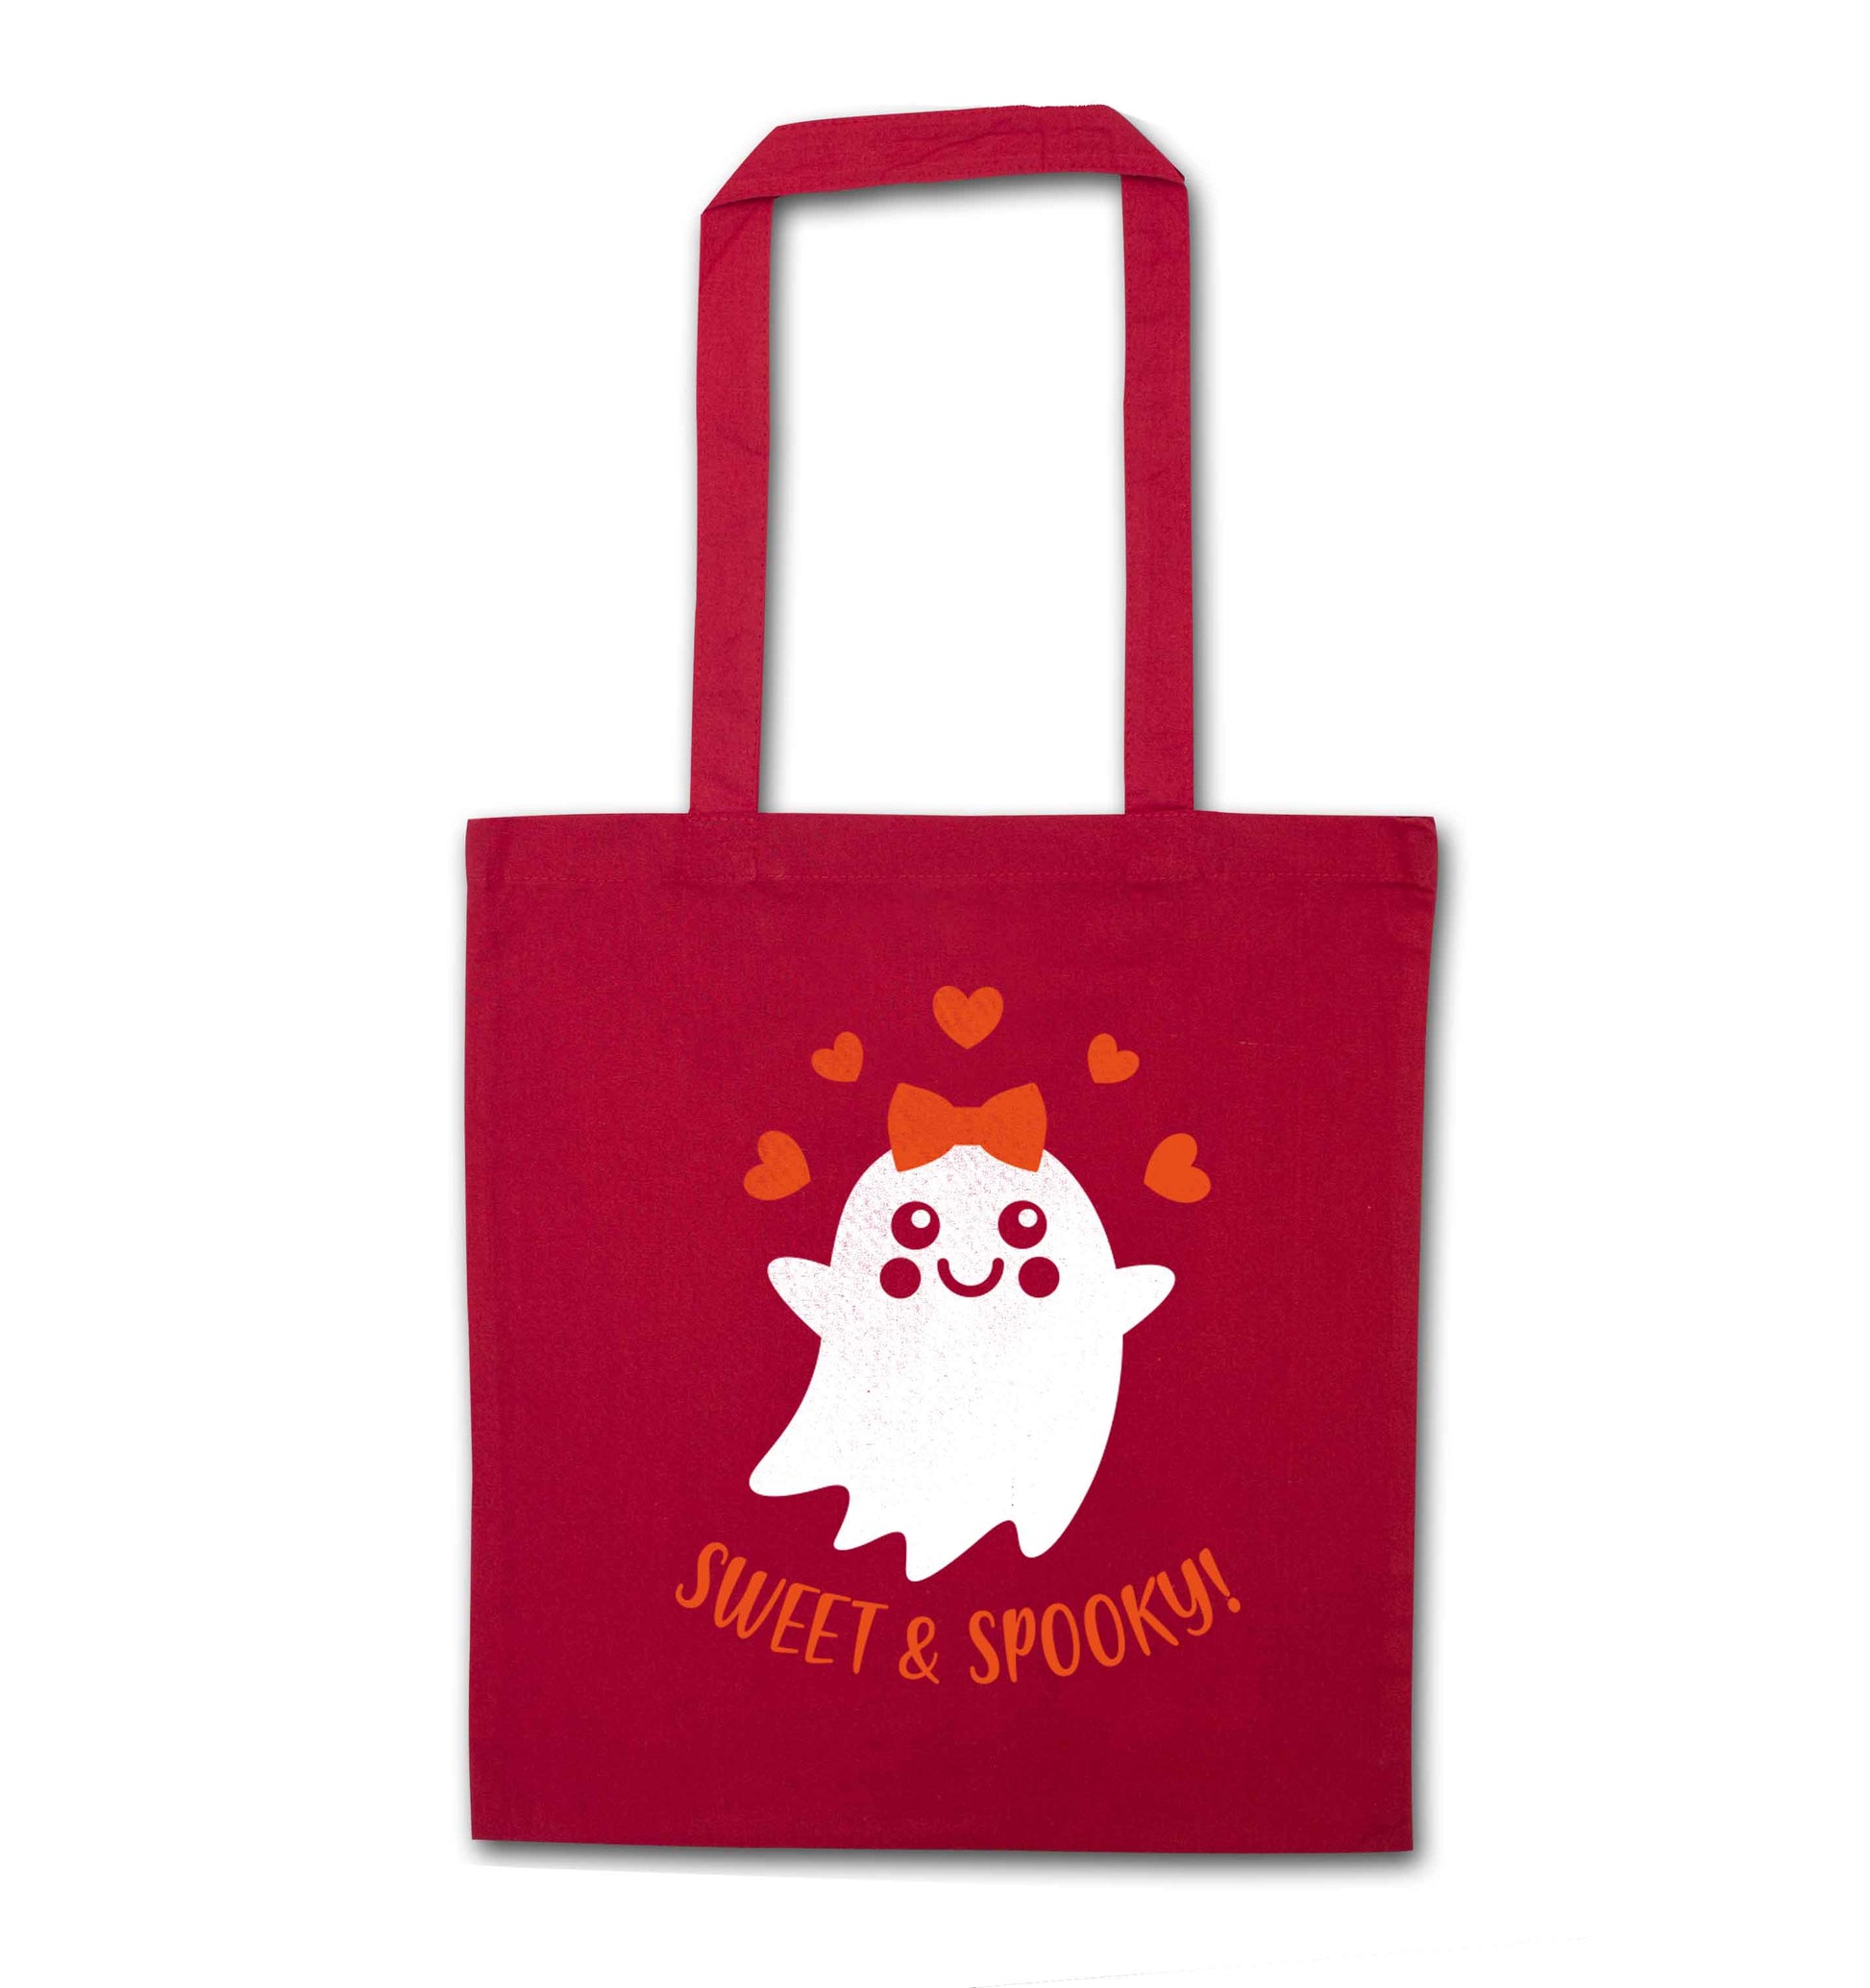 Sweet and spooky red tote bag